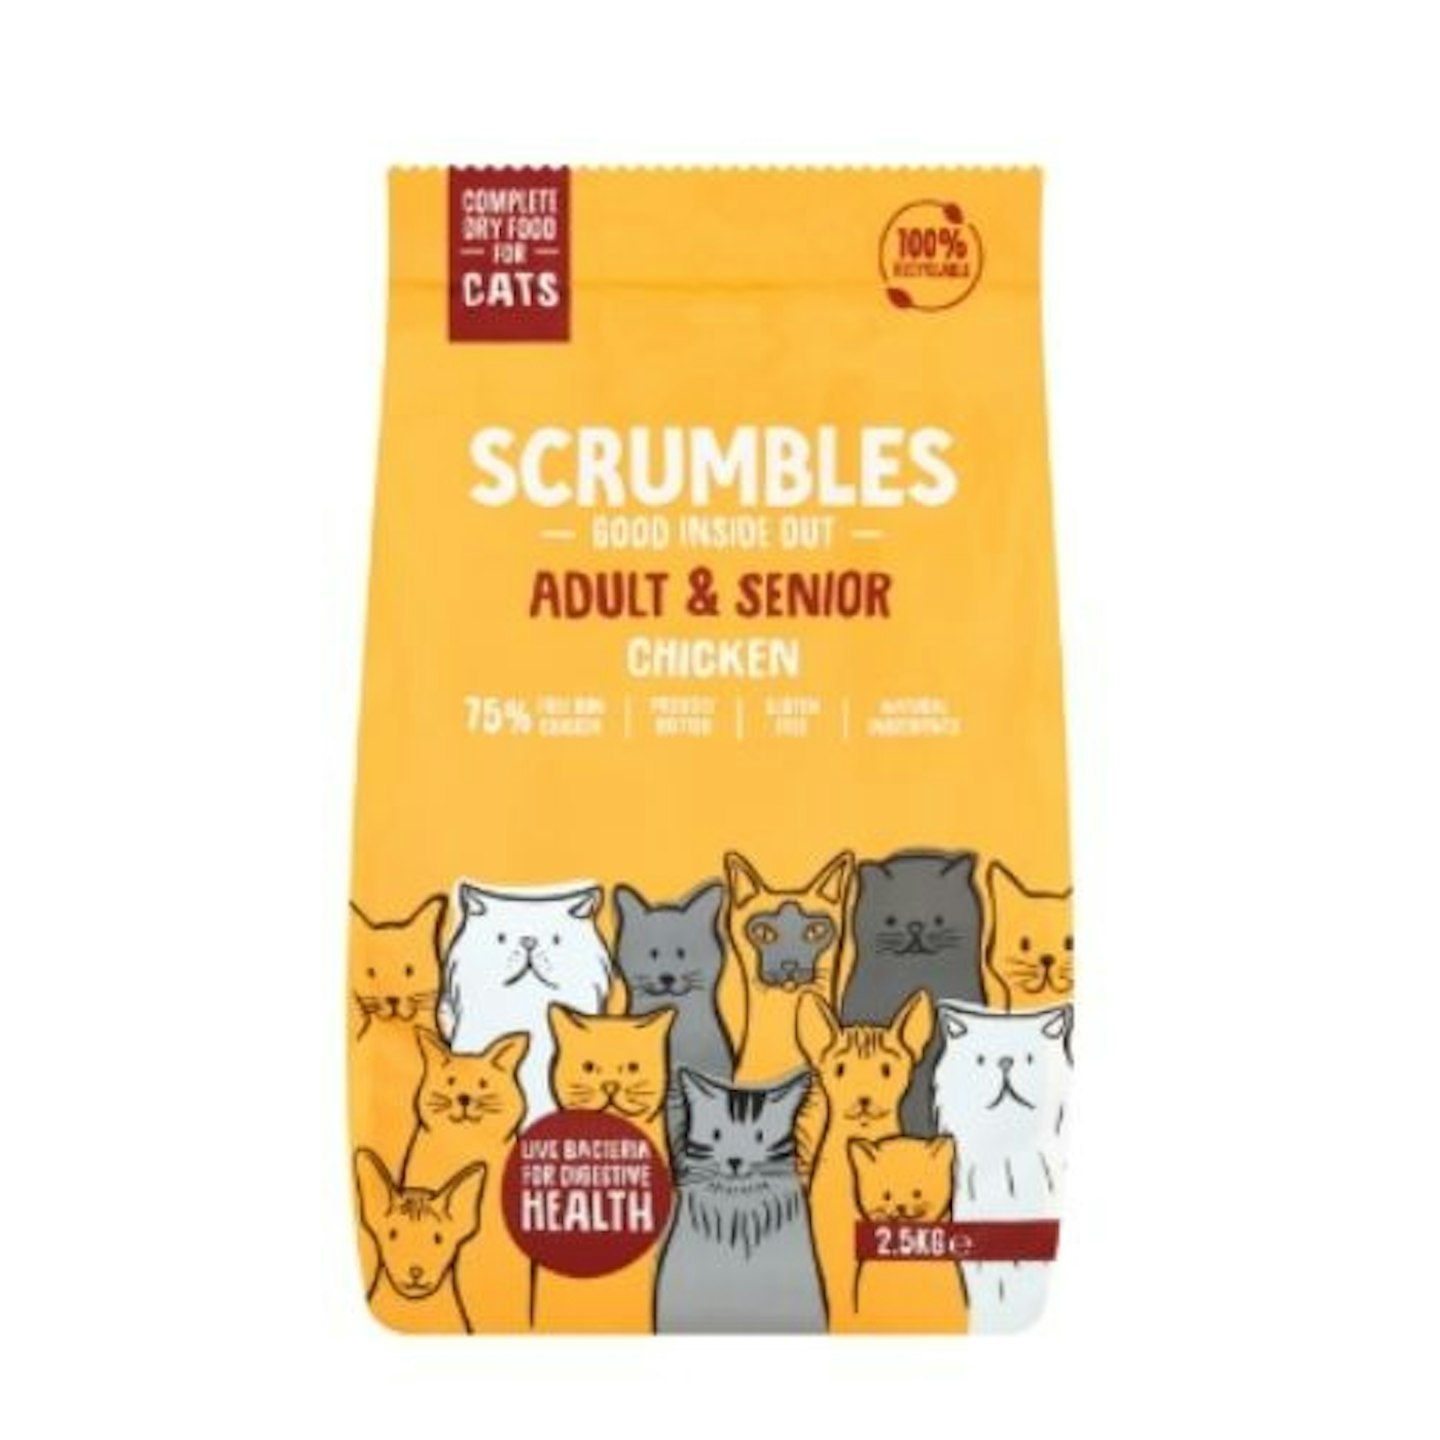 Scrumbles chicken dry cat food bag